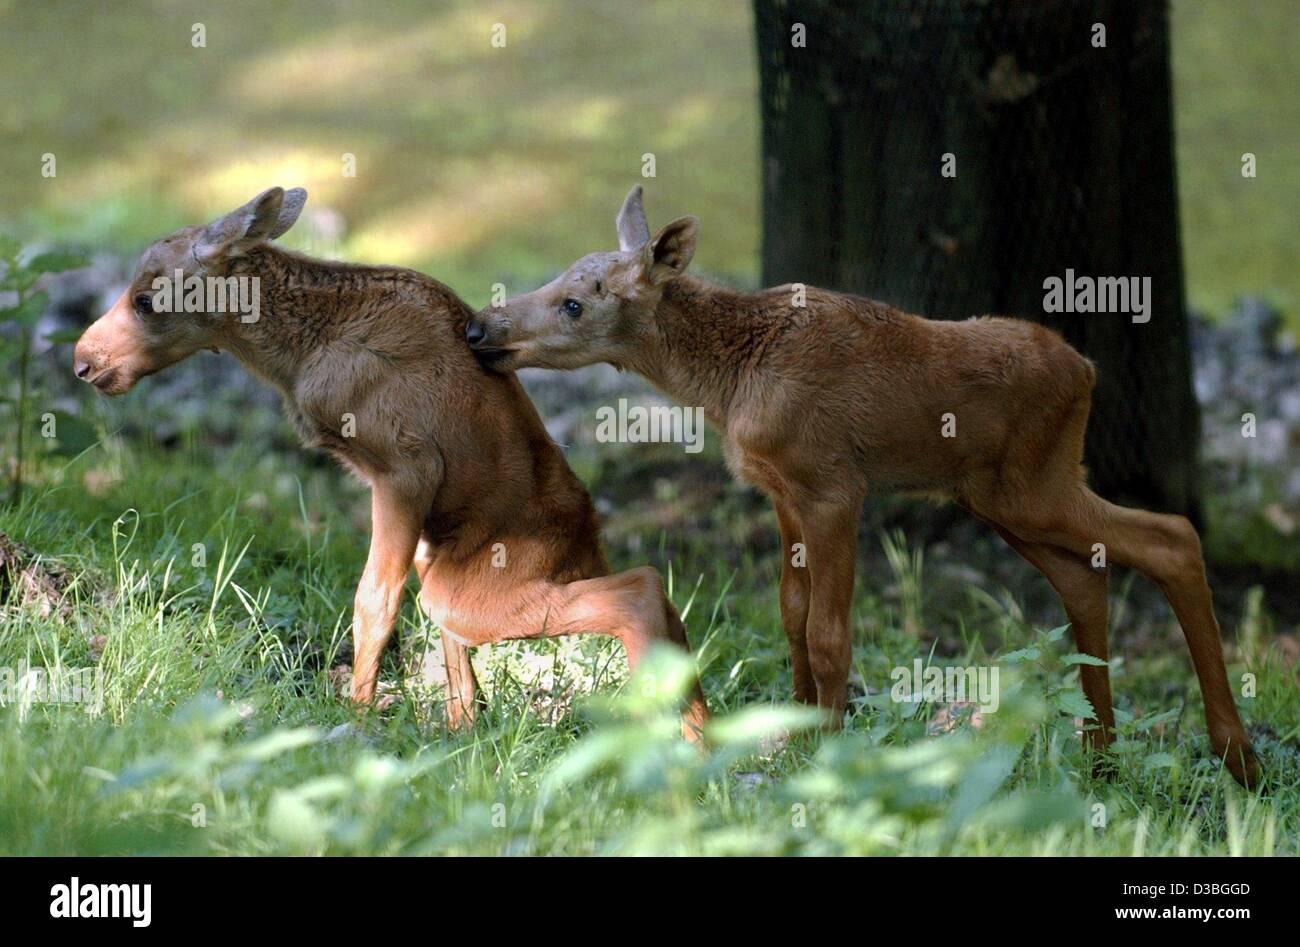 (dpa) - The first steps are the hardest: The baby mooses born on 22 May learn to walk in the deer park near Vahrendorf, Germany, 27 May 2003. They are about 80 cm large. Stock Photo